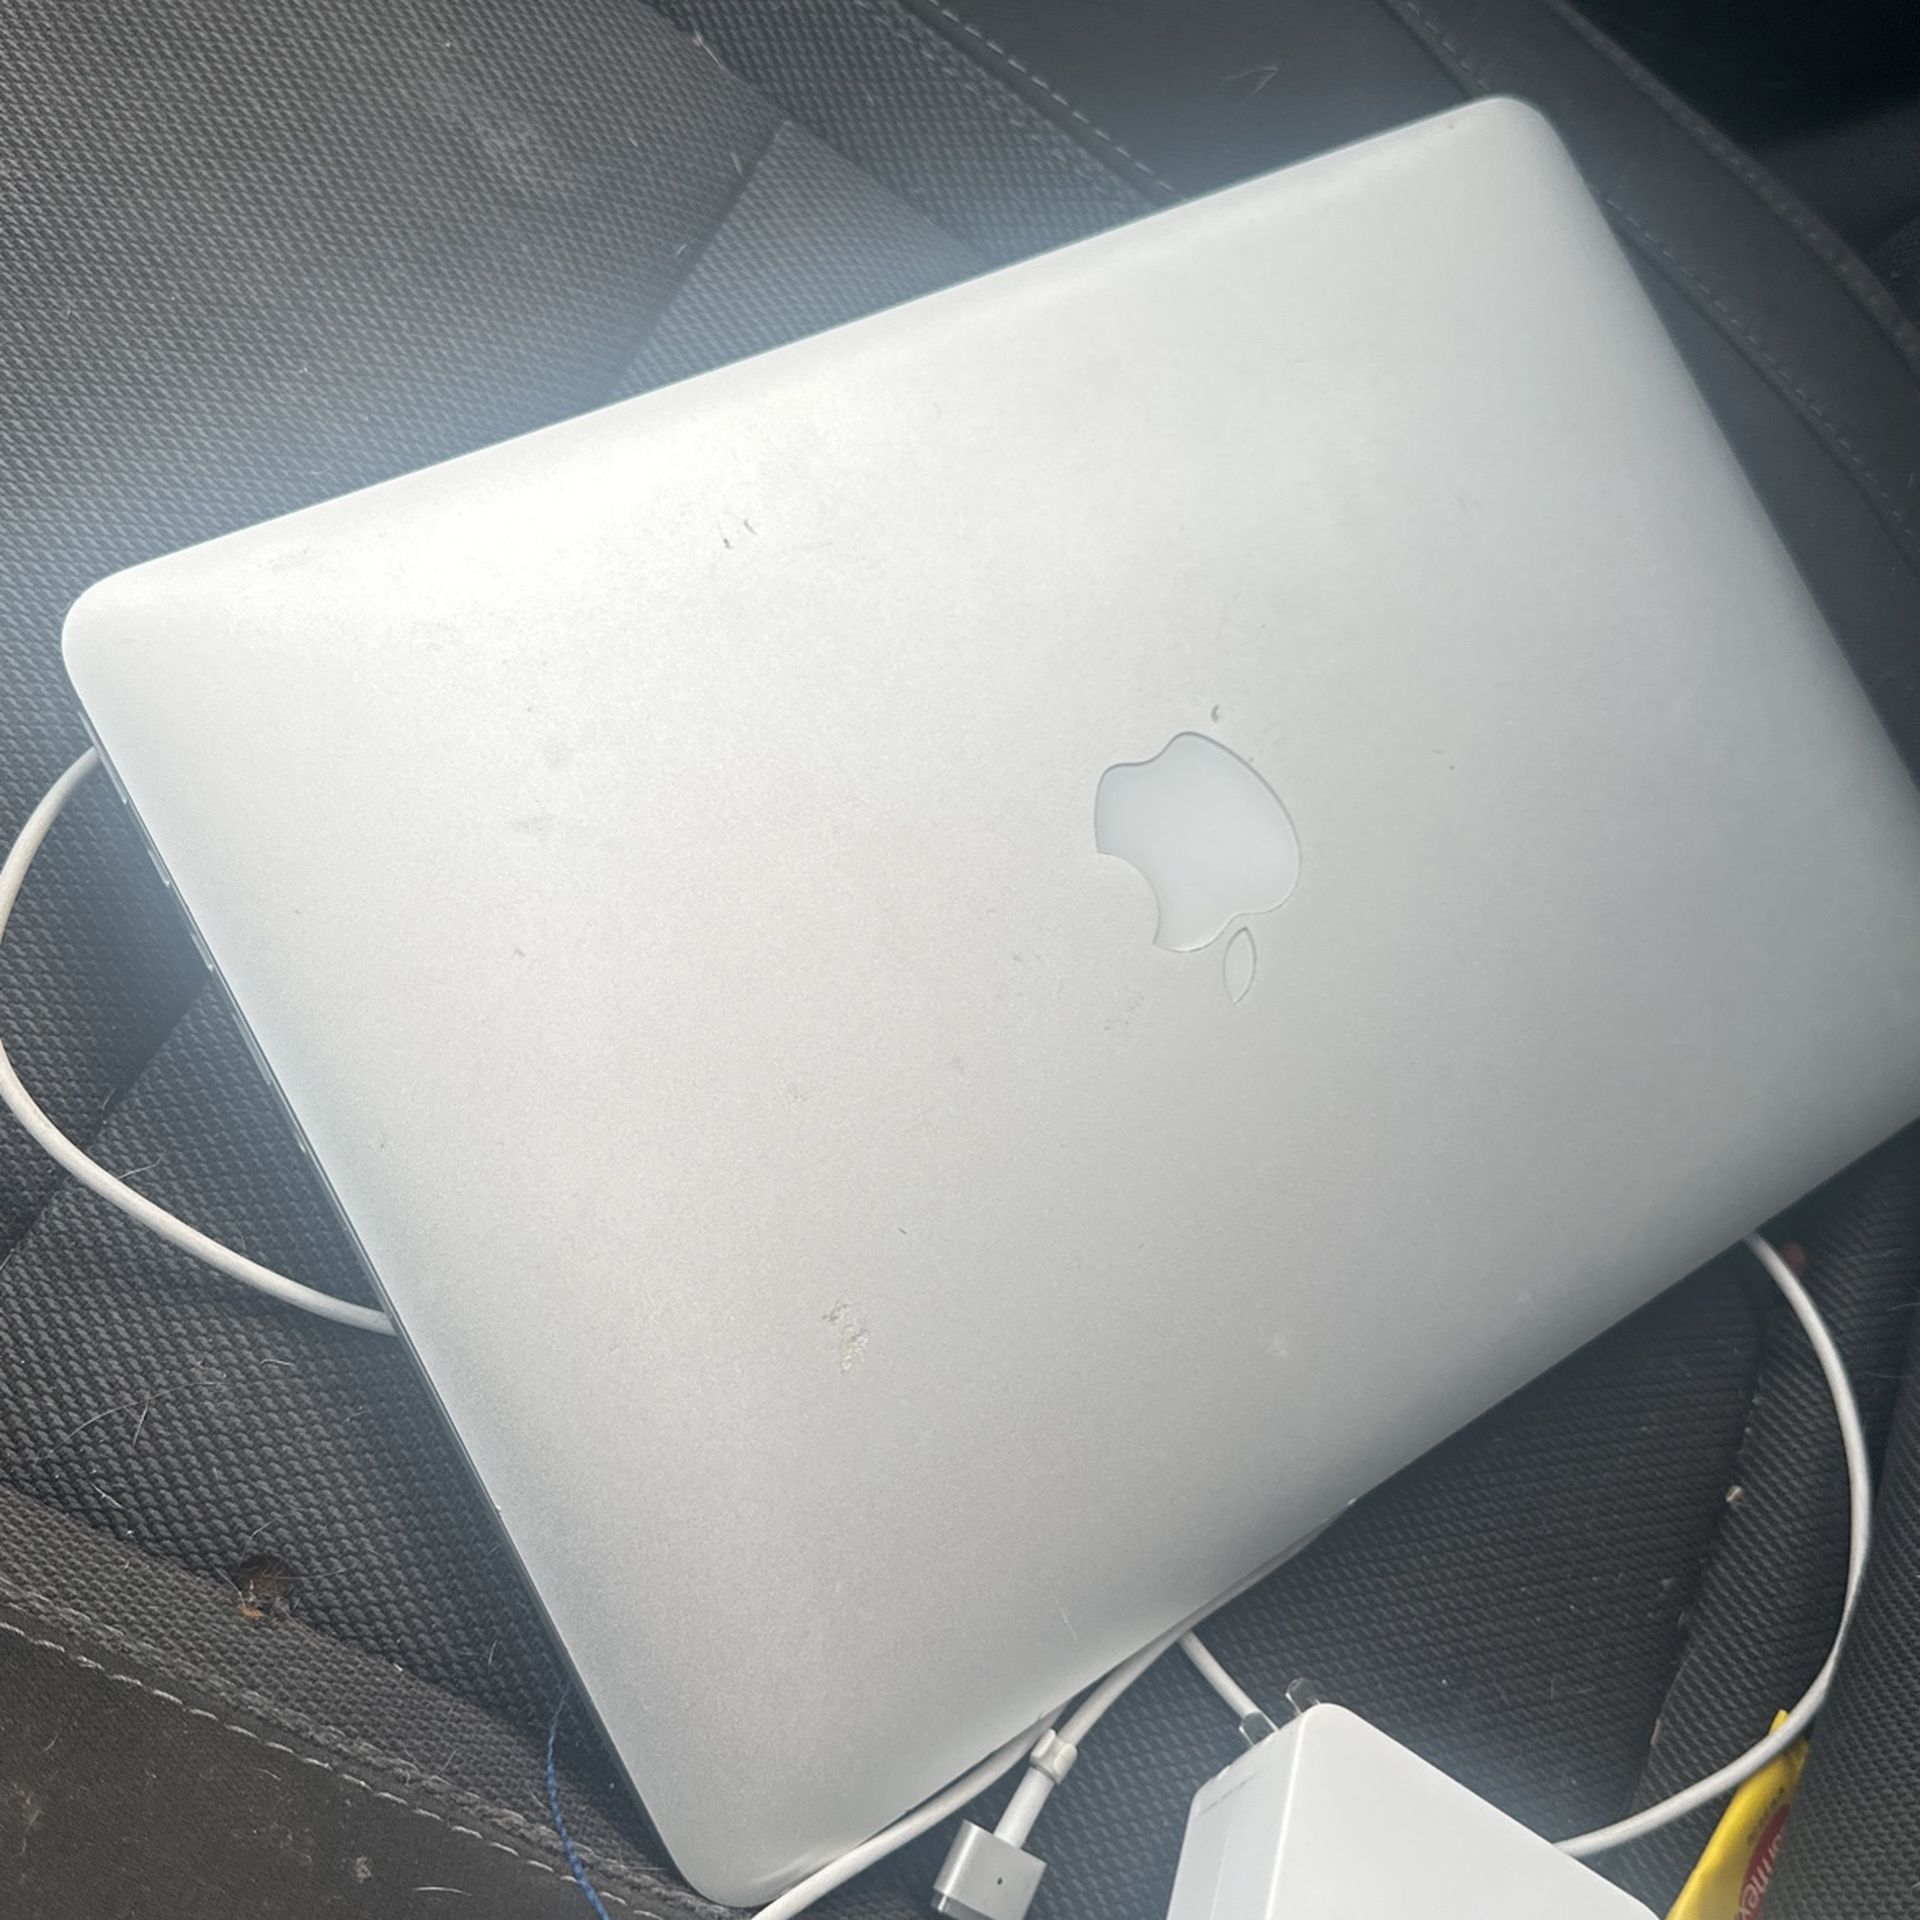 MacBook Pro Does Not Turn On Trying To Sell From Parts